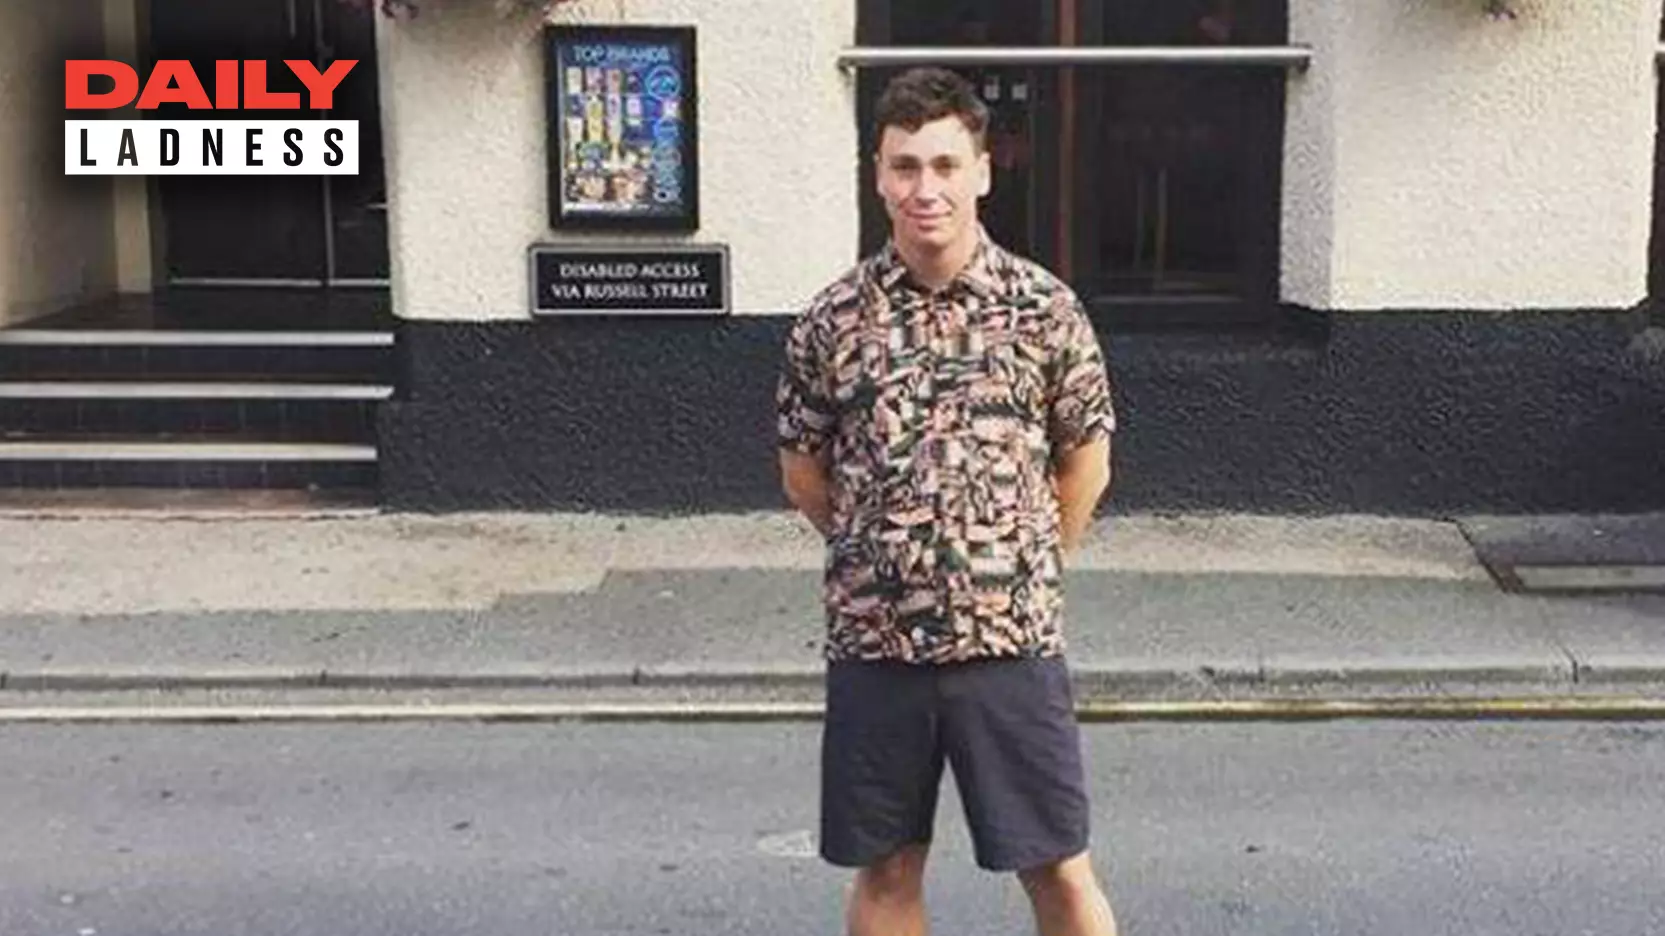 LAD Visits Over 120 Wetherspoon Pubs In Just Six Weeks